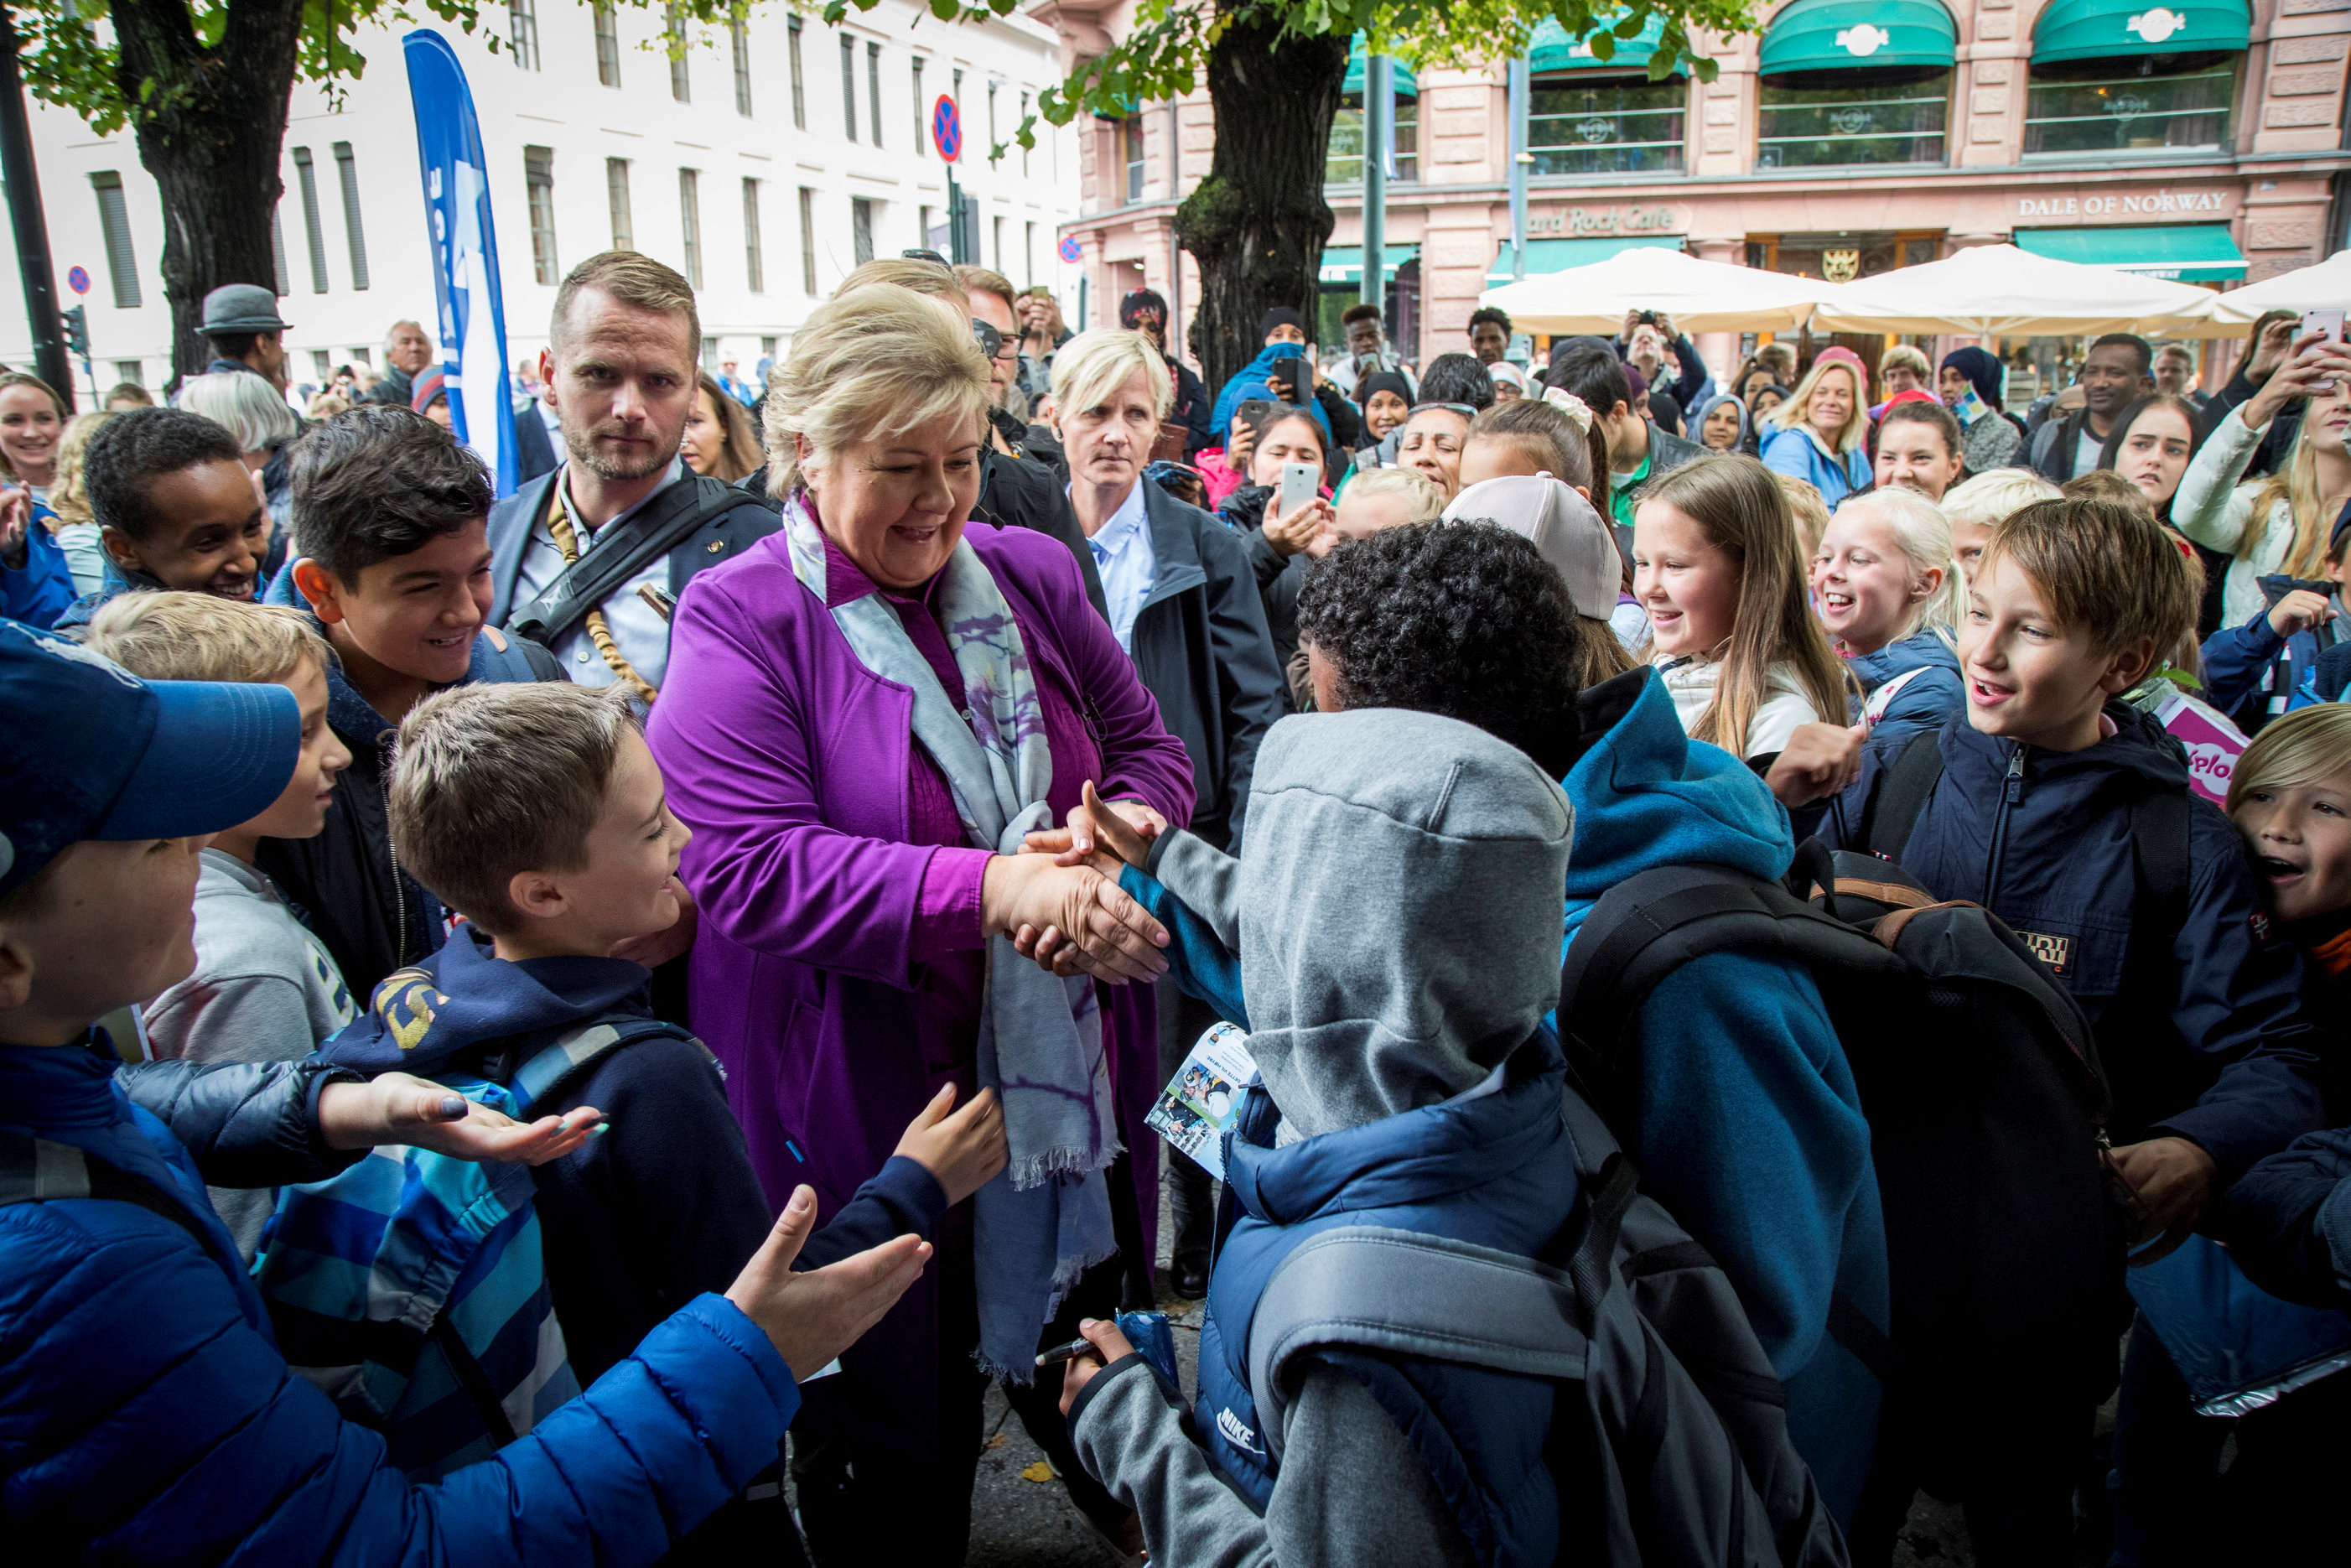 Norway's Prime Minister and leader of the Conservative Party, Erna Solberg, at an election campaign event in Oslo, Norway September 7, 2017. Heiko Junge/NTB Scanpix/via REUTERS/File Photo